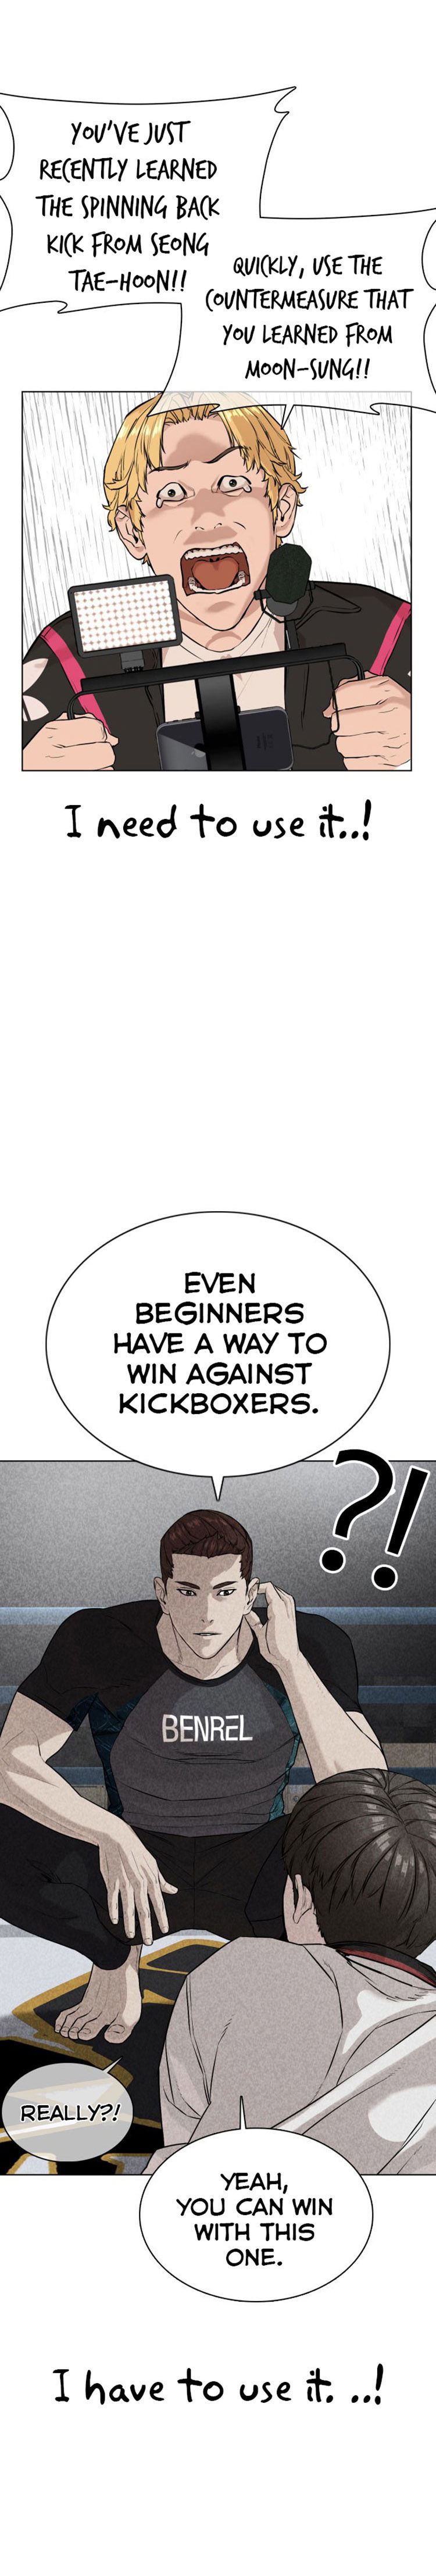 How To Fight Chapter 32  And Win Against Kickboxing page 33